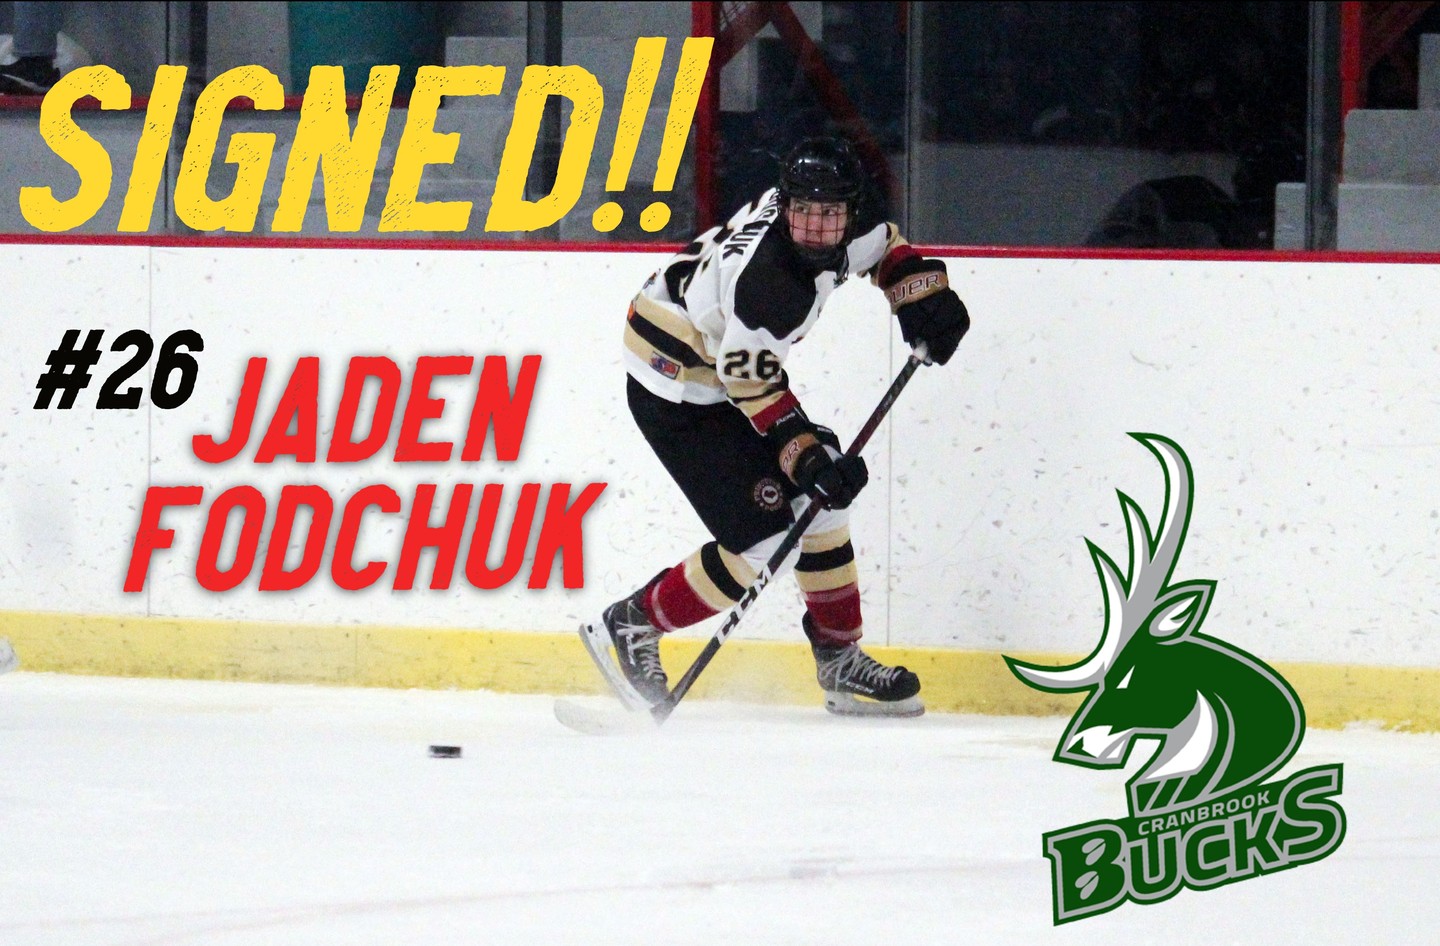 The Posse are proud to announce the advancement of Jaden Fodchuk. Fodchuk has been called up by the Cranbrook Bucks of the BCHL for the remainder of the season. Fodchuk lead the KIJHL in rookie scoring with 19 goals and second in rookie points with 31. Congrats Jaden